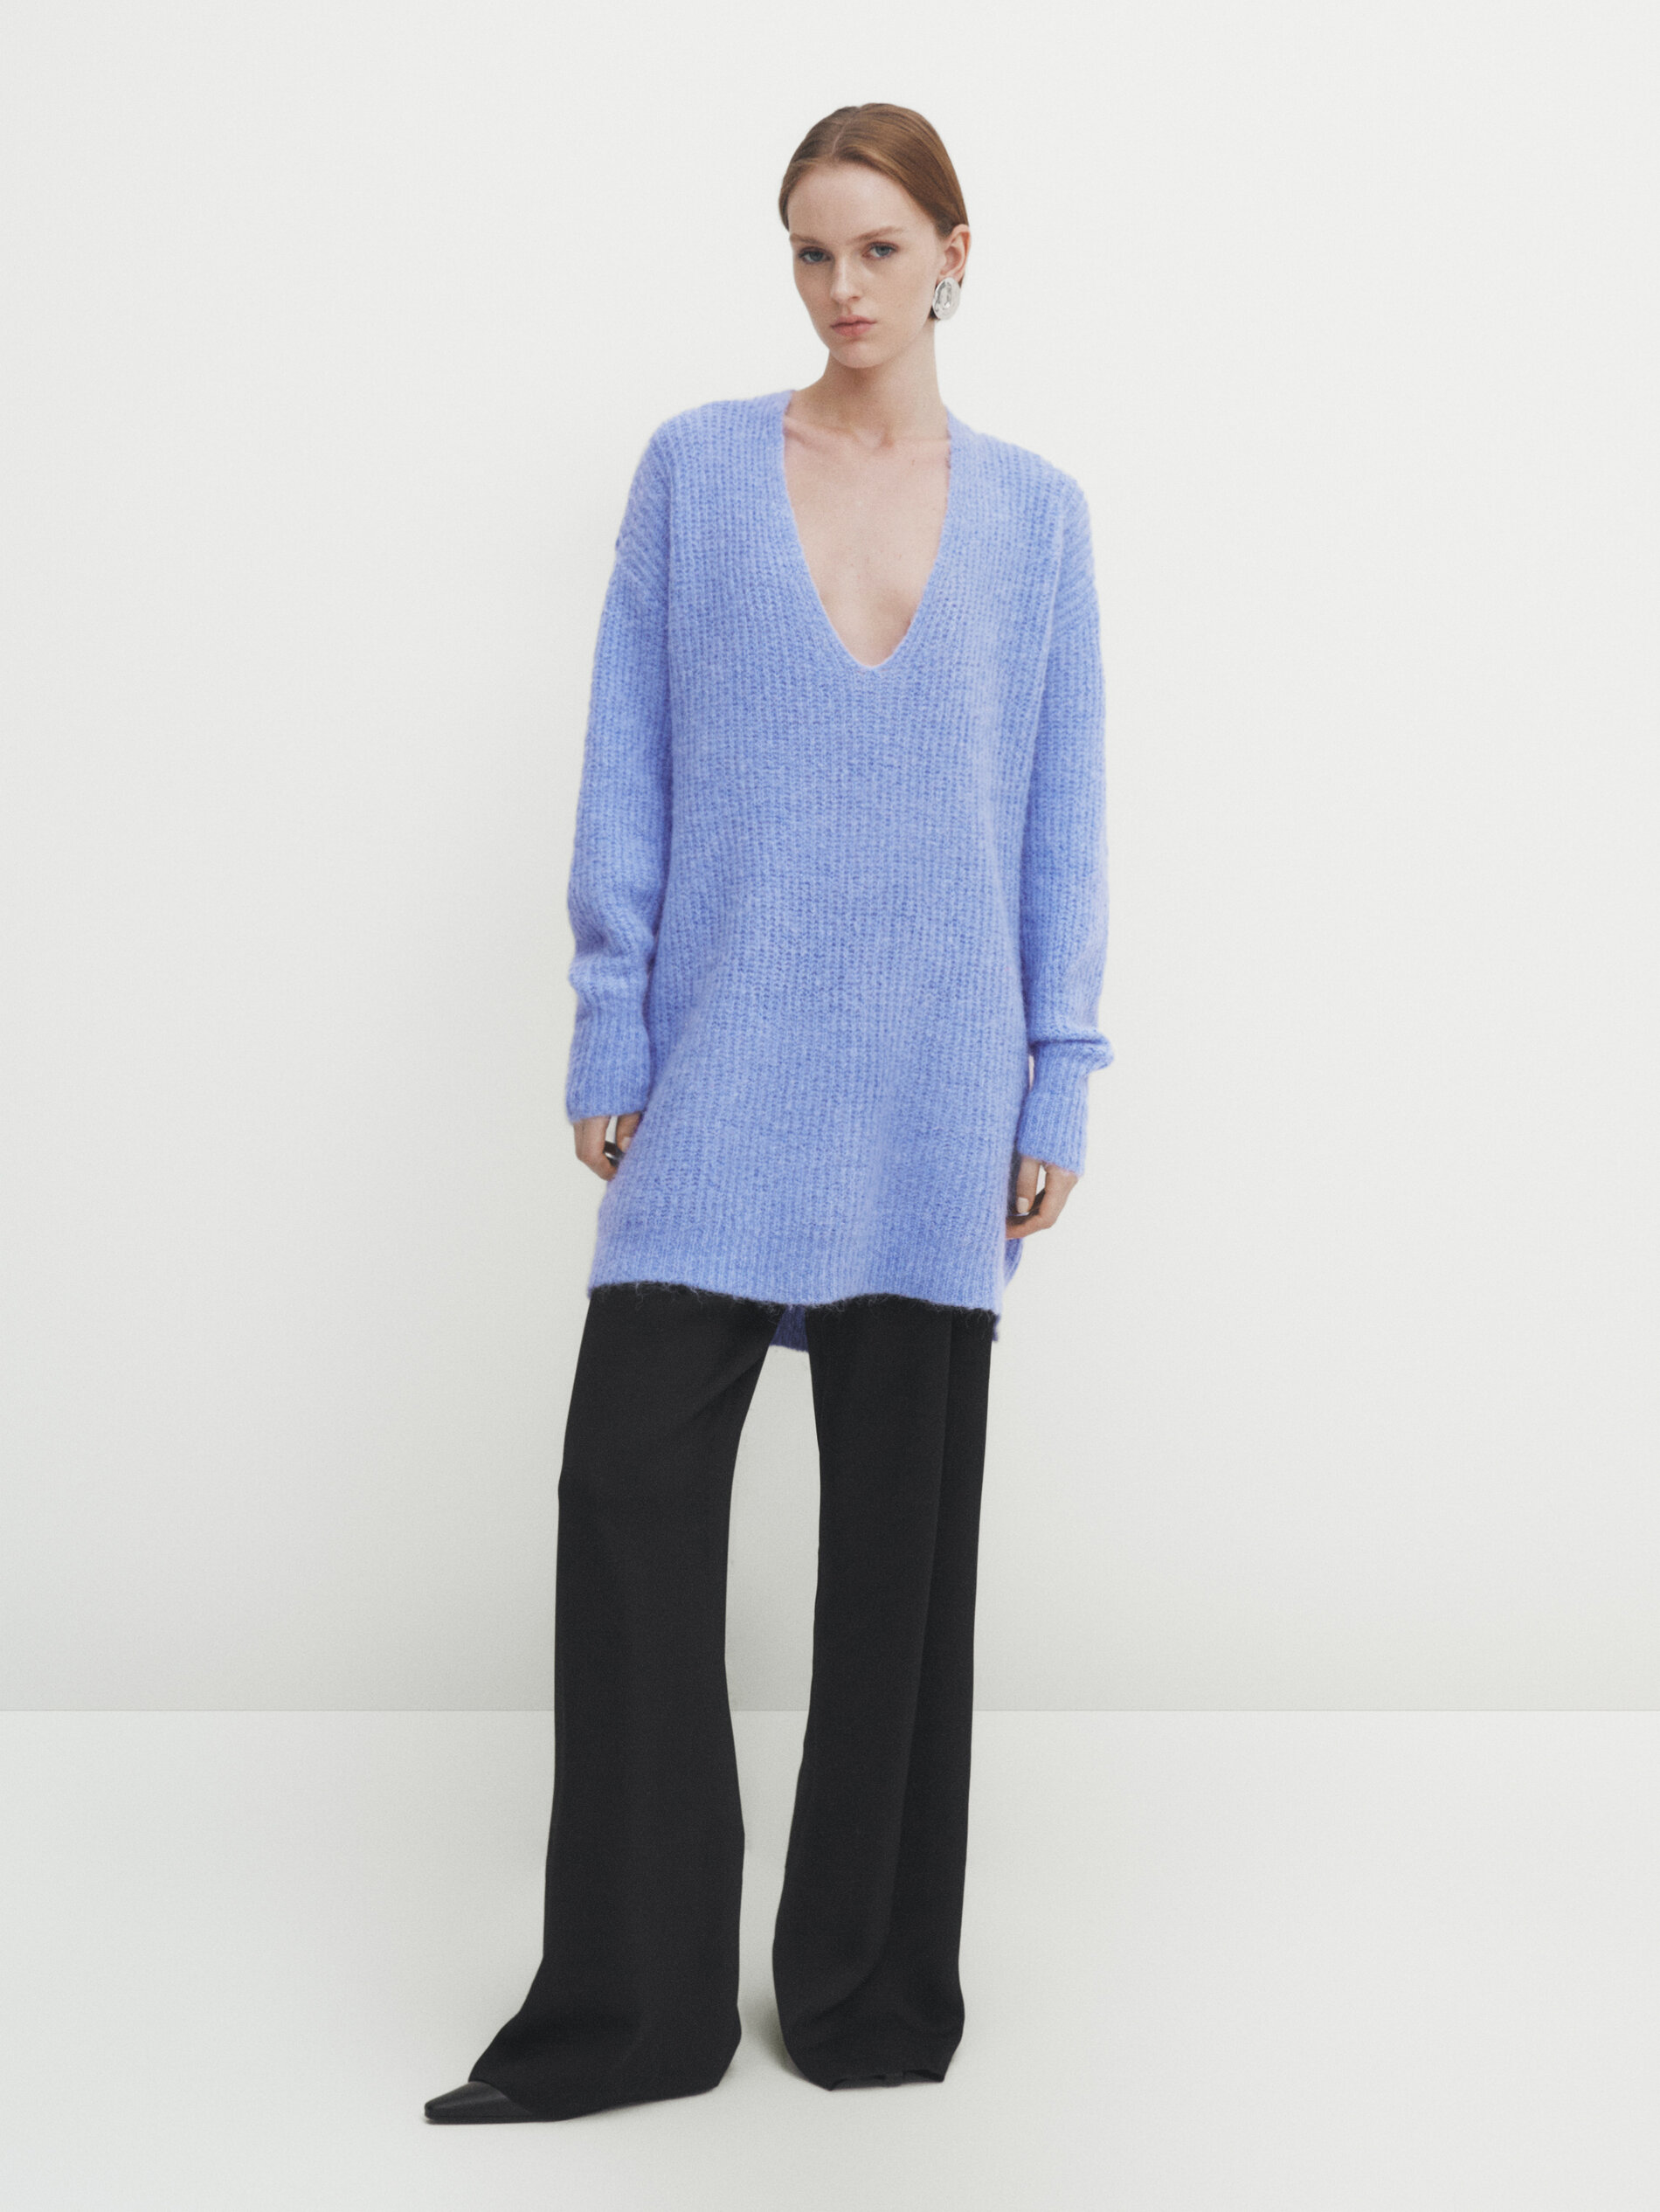 Knit sweater with plunging V-neckline - Studio